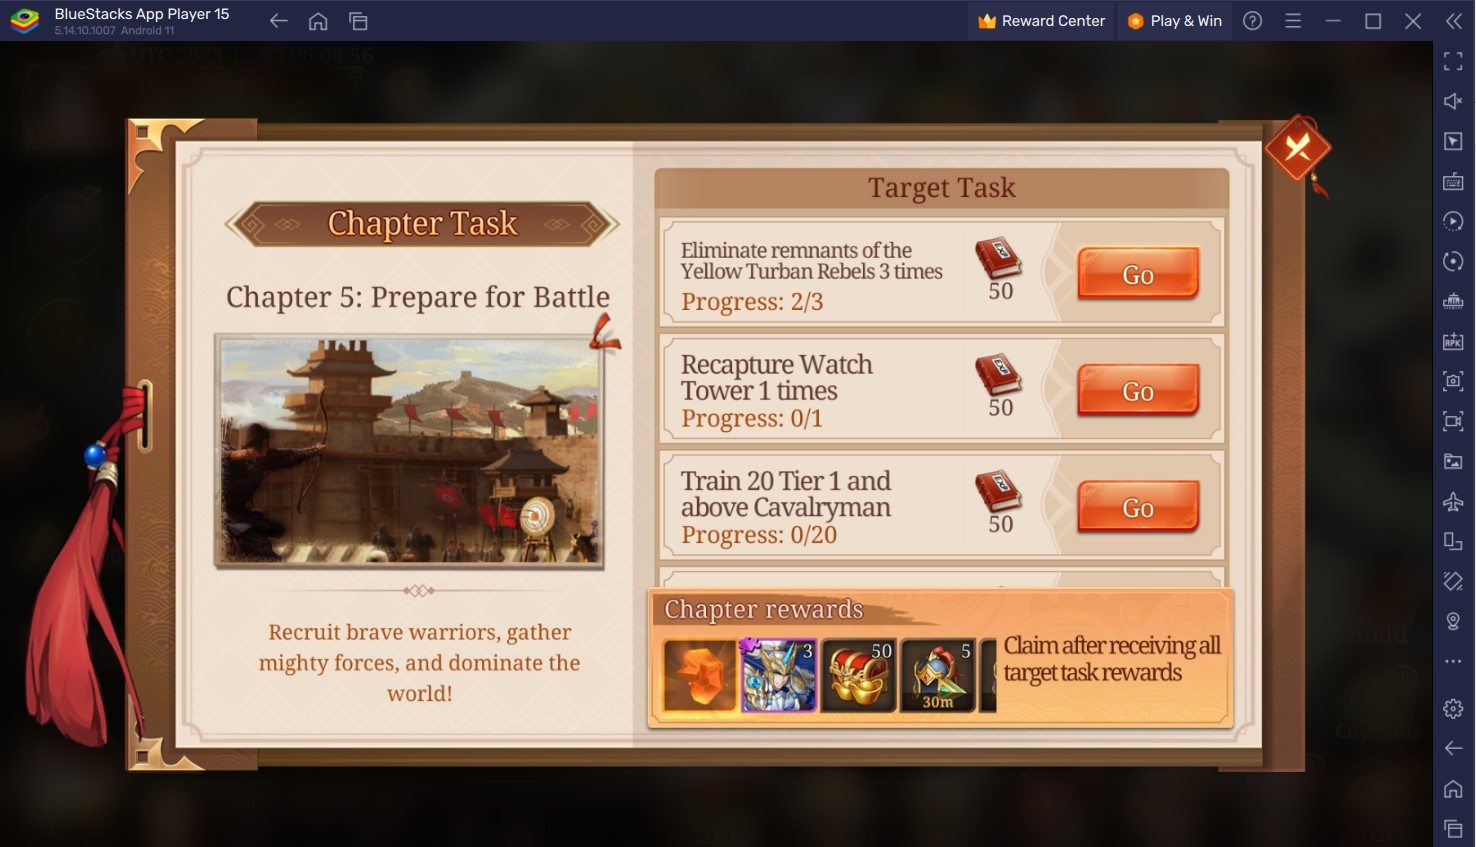 Ambition of Kings Tips and Tricks to Get More Rewards and Improve Account Power